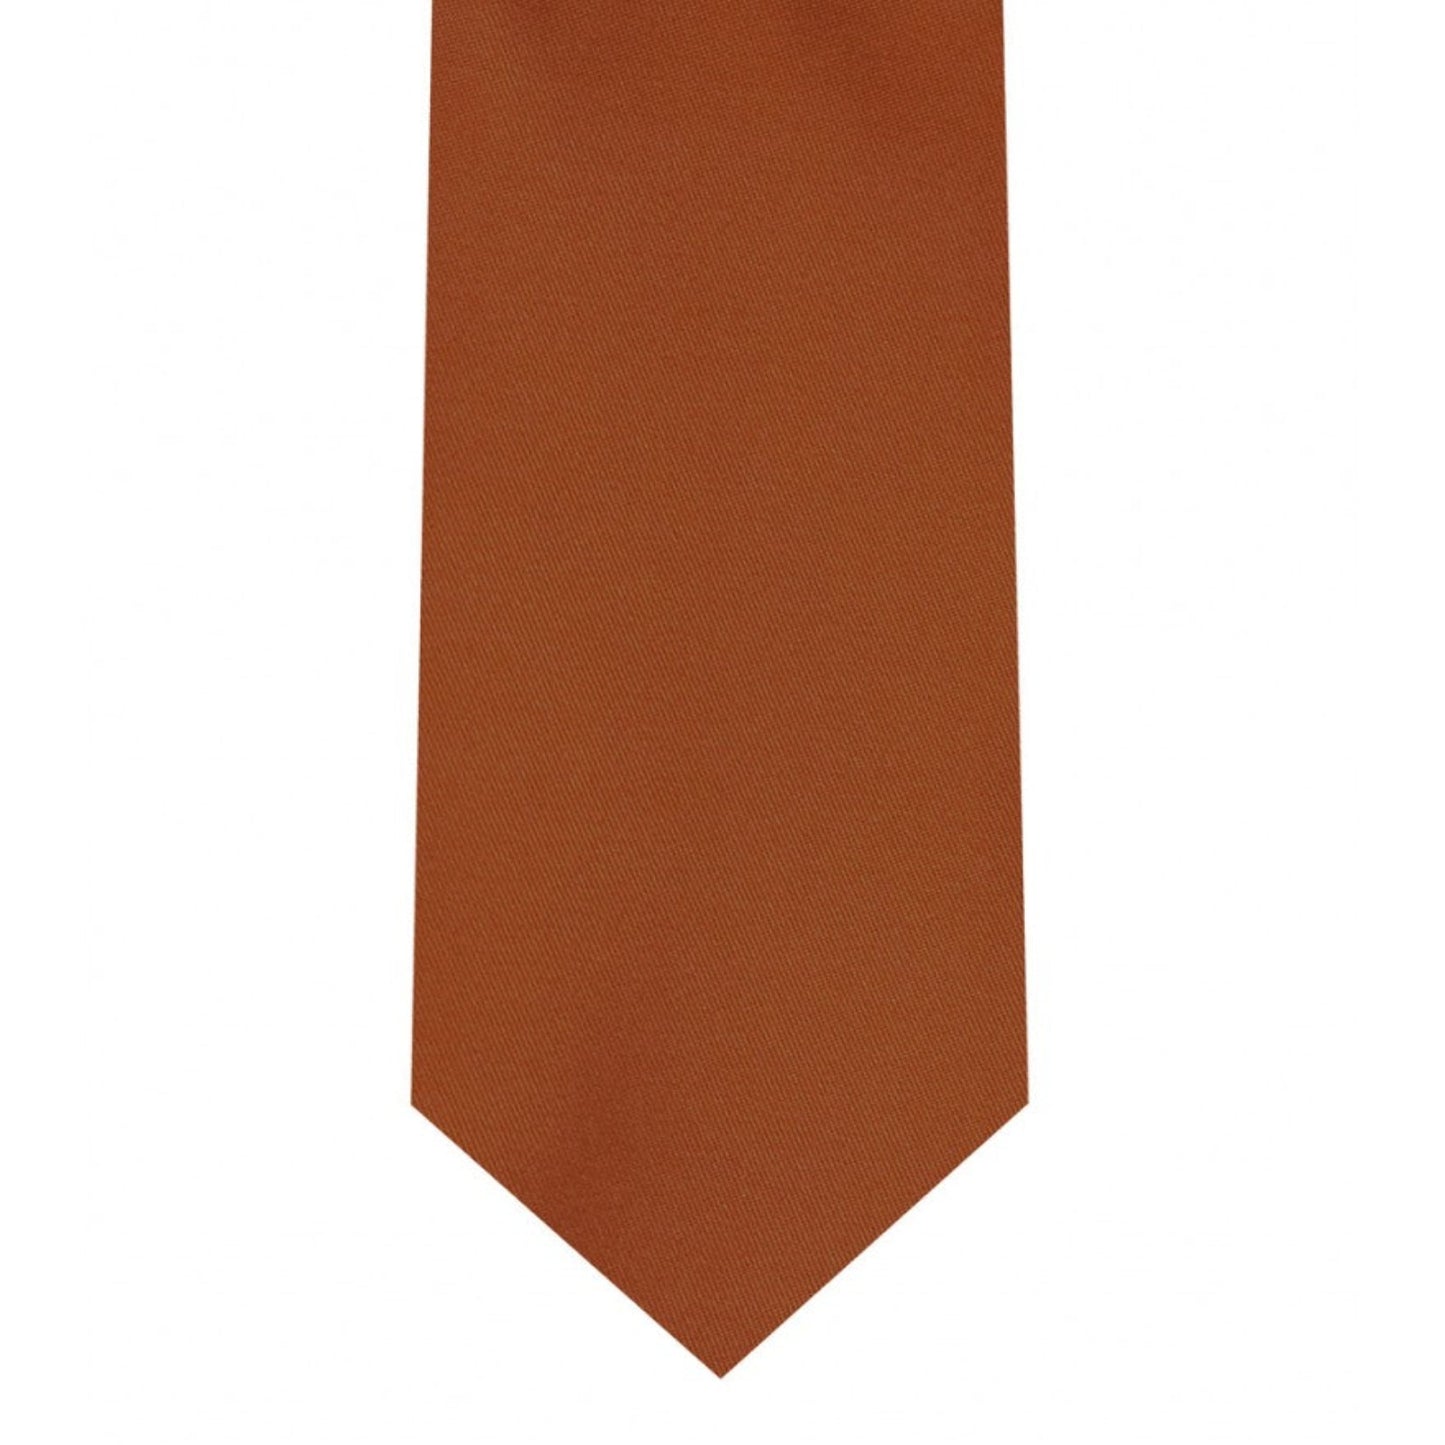 Classic Cinnamon Tie Skinny width 2.75 inches With Matching Pocket Square | KCT Menswear